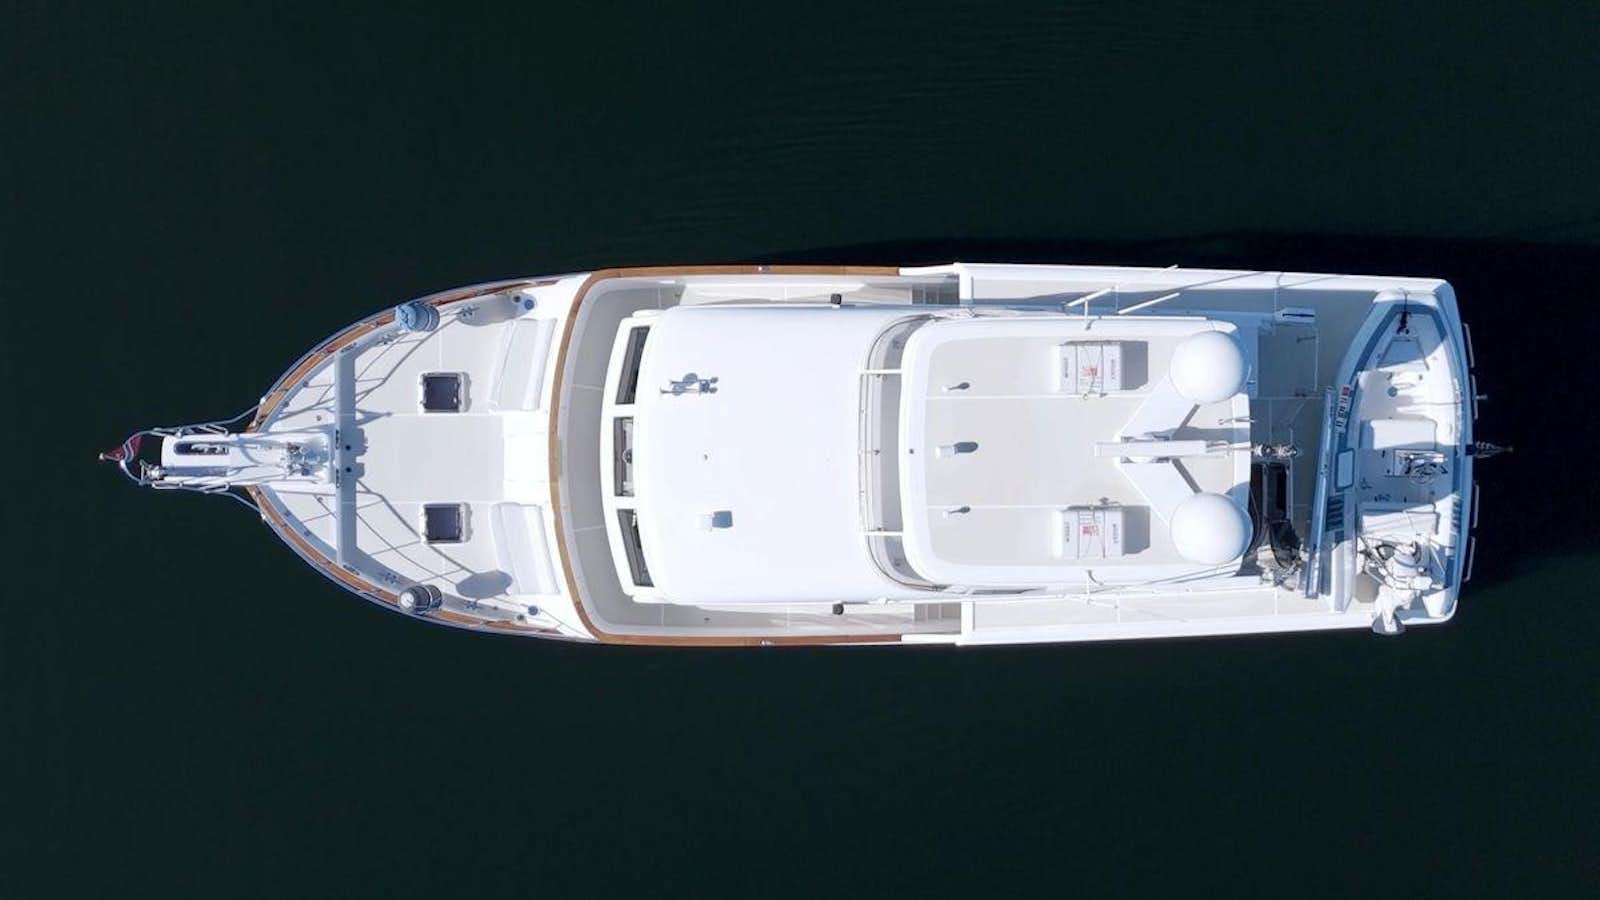 Shananigan's
Yacht for Sale